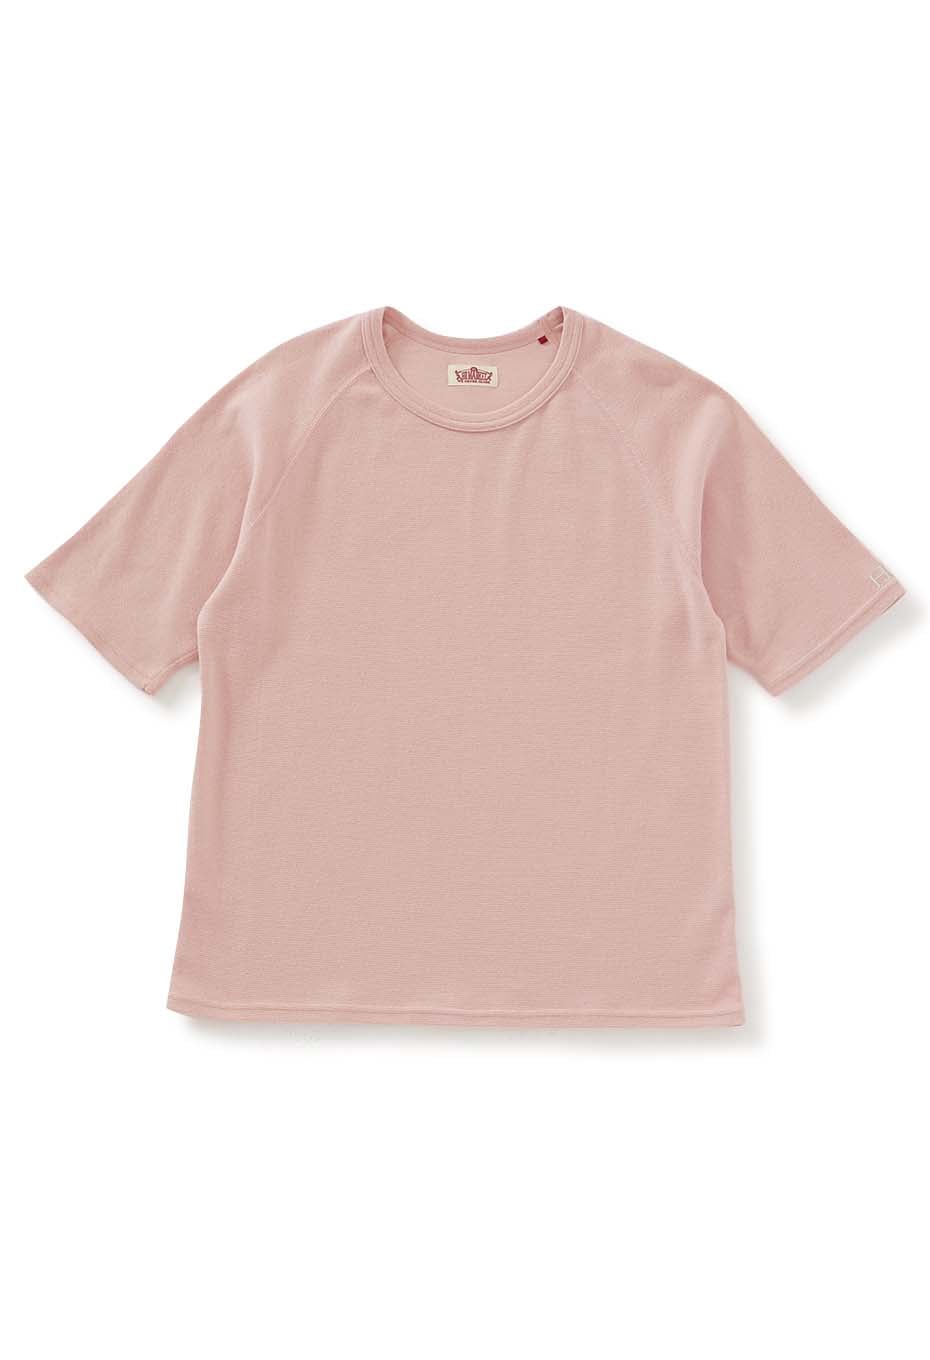 stretch fraise CN Relax fit SS T-shirts Women's